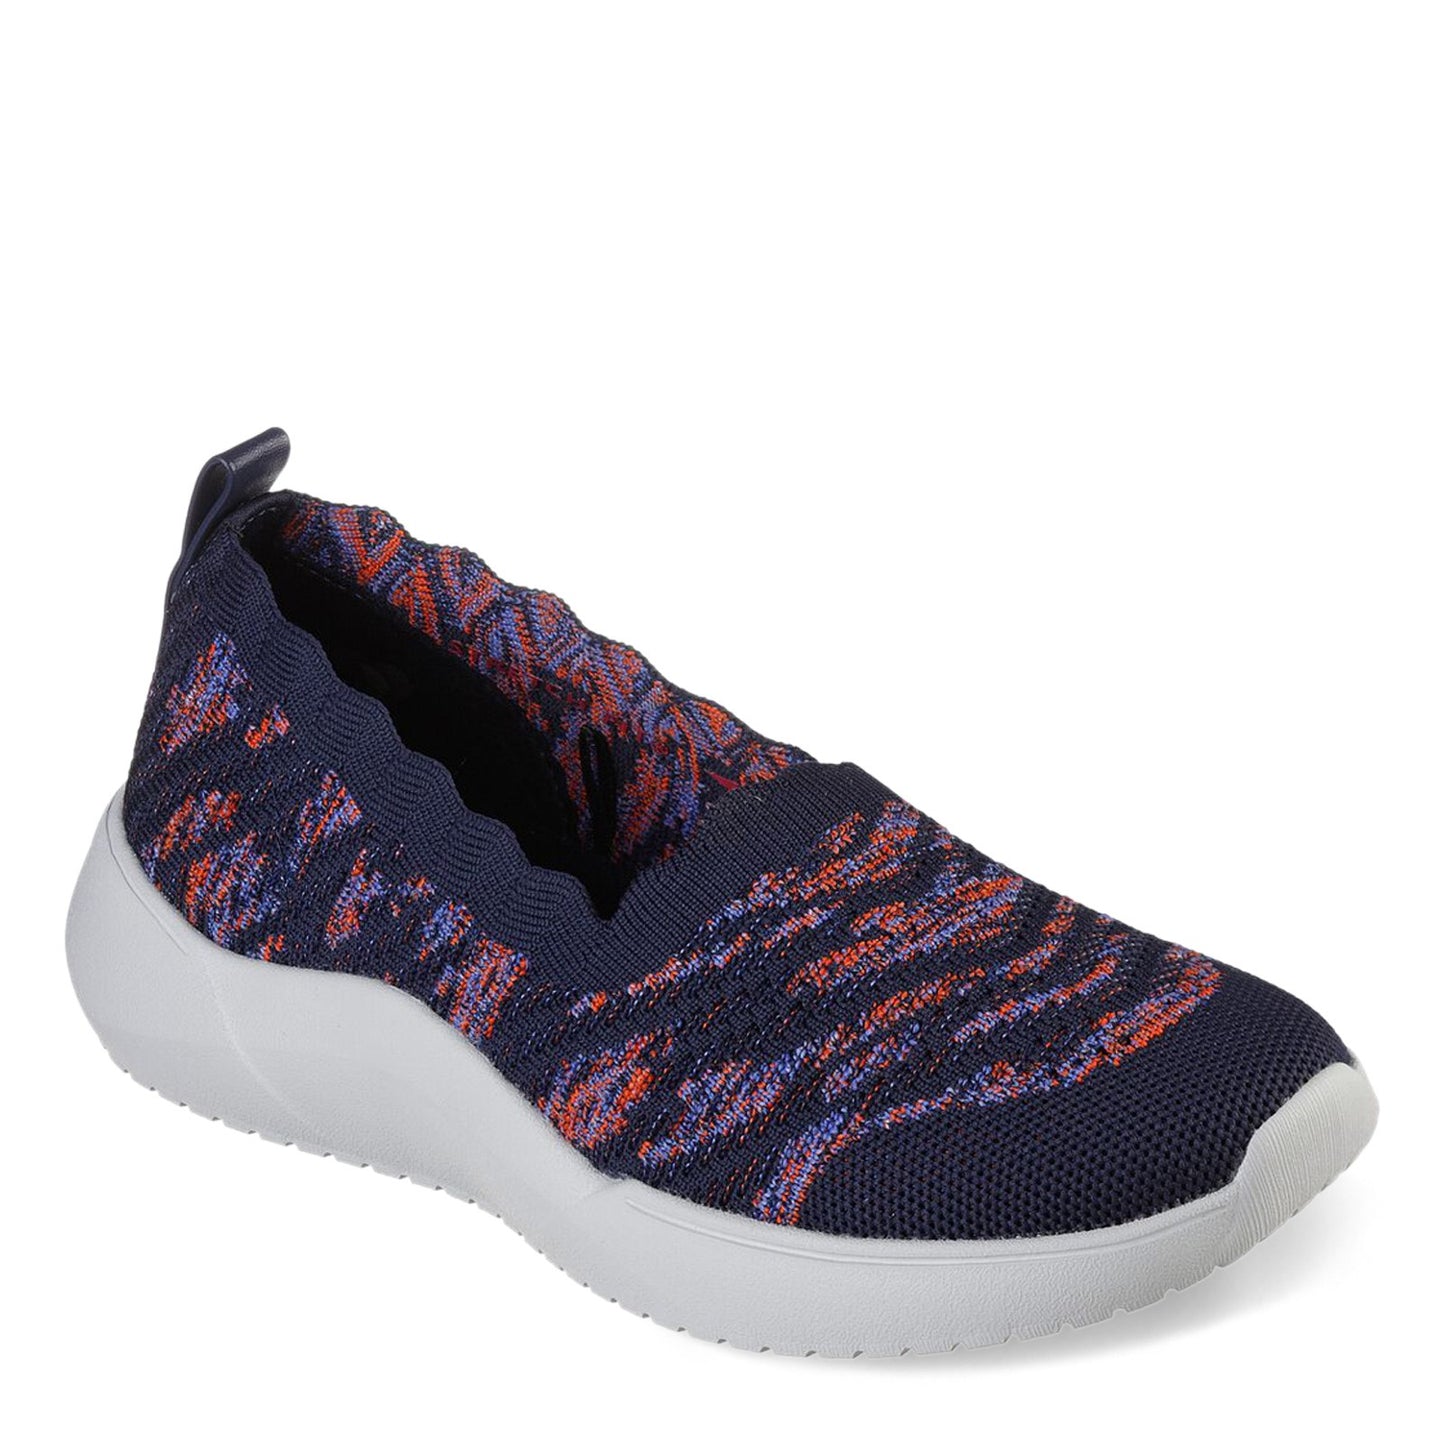 Peltz Shoes  Women's Skechers Relaxed Fit: Seager Cup - My Impression Slip-On NAVY MULTI 158472-NVMT